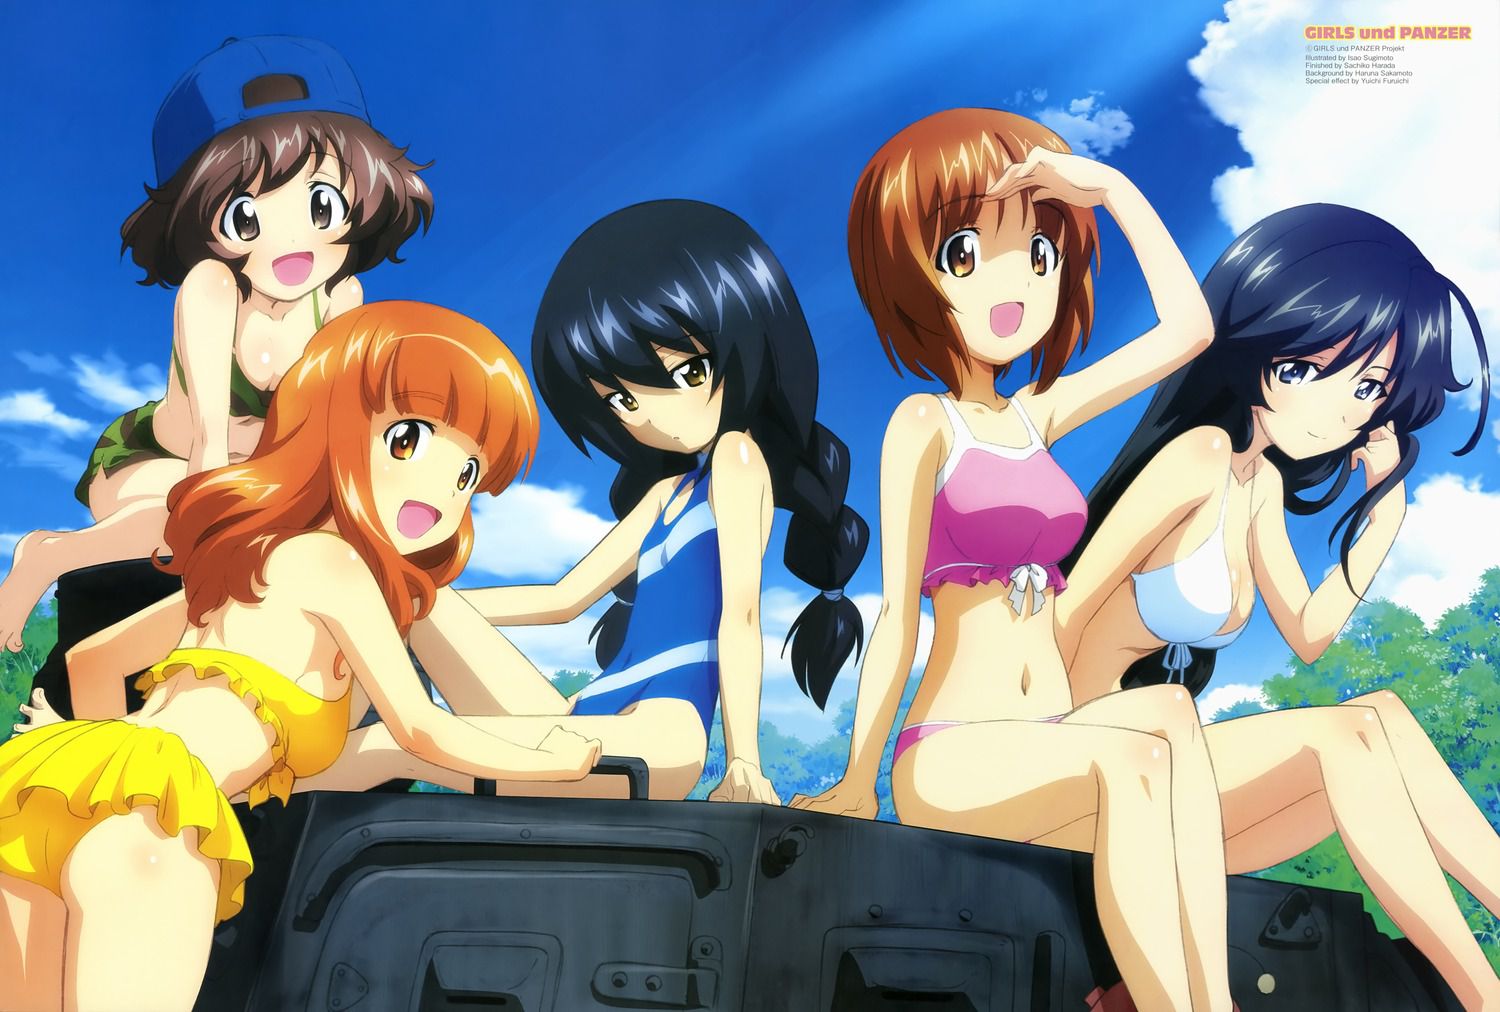 [Plate] summer a perfect swimsuit characters! 15 pictures [pictures and wallpapers] (girls & Panzer 15) 5